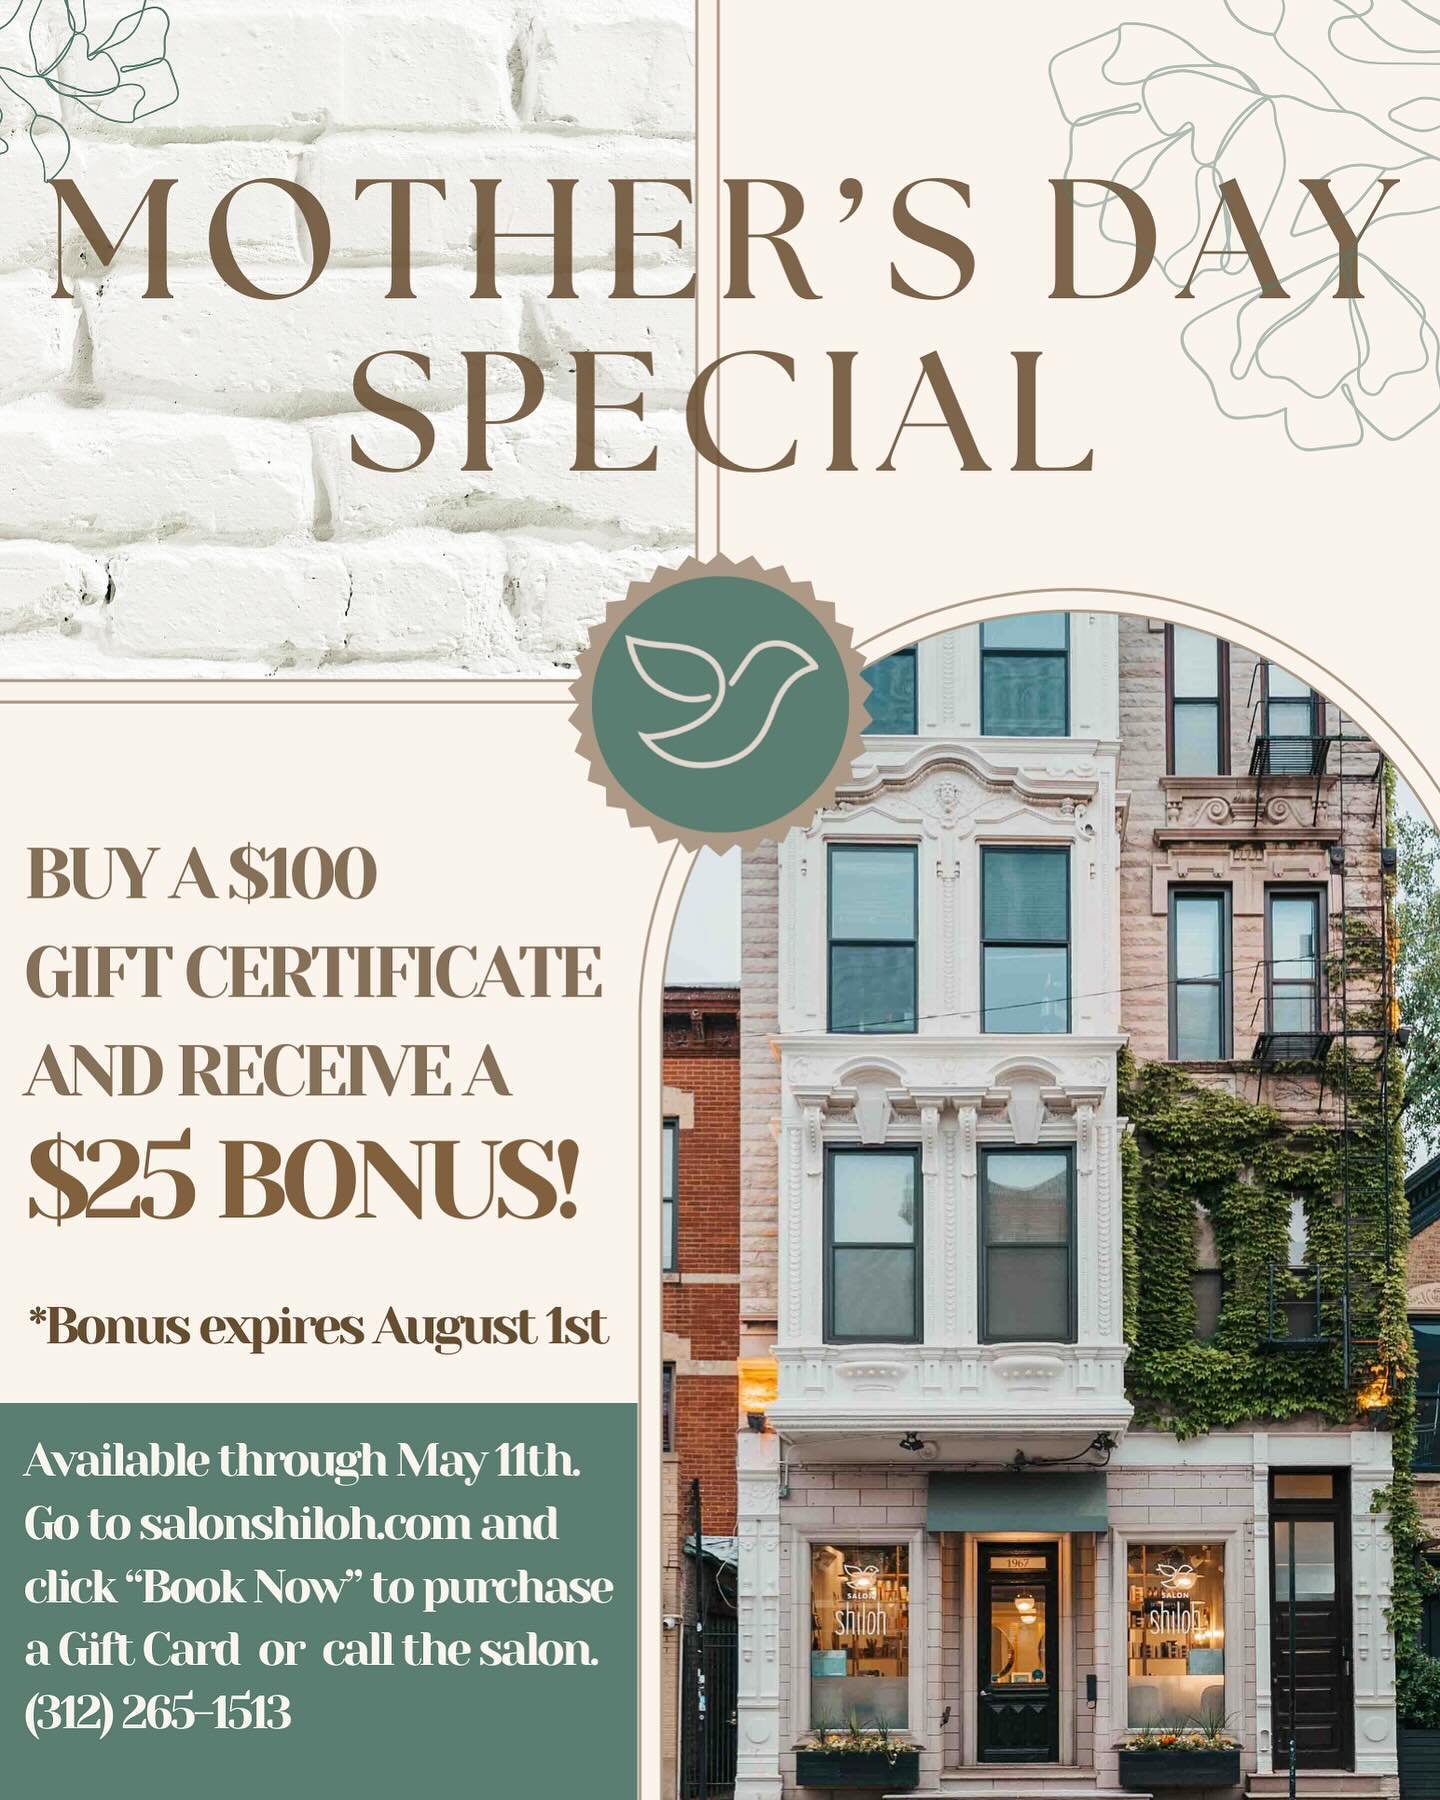 Mother&rsquo;s Day is coming quick! Give someone special the gift of fabulous hair at Salon Shiloh. Offer expires 5/11/24. Bonus cash valid until 8/1/24 Call the salon with any questions. #MothersDayGifts
#HairSalon
#GiftCards
#LincolnPark
#HairCare
